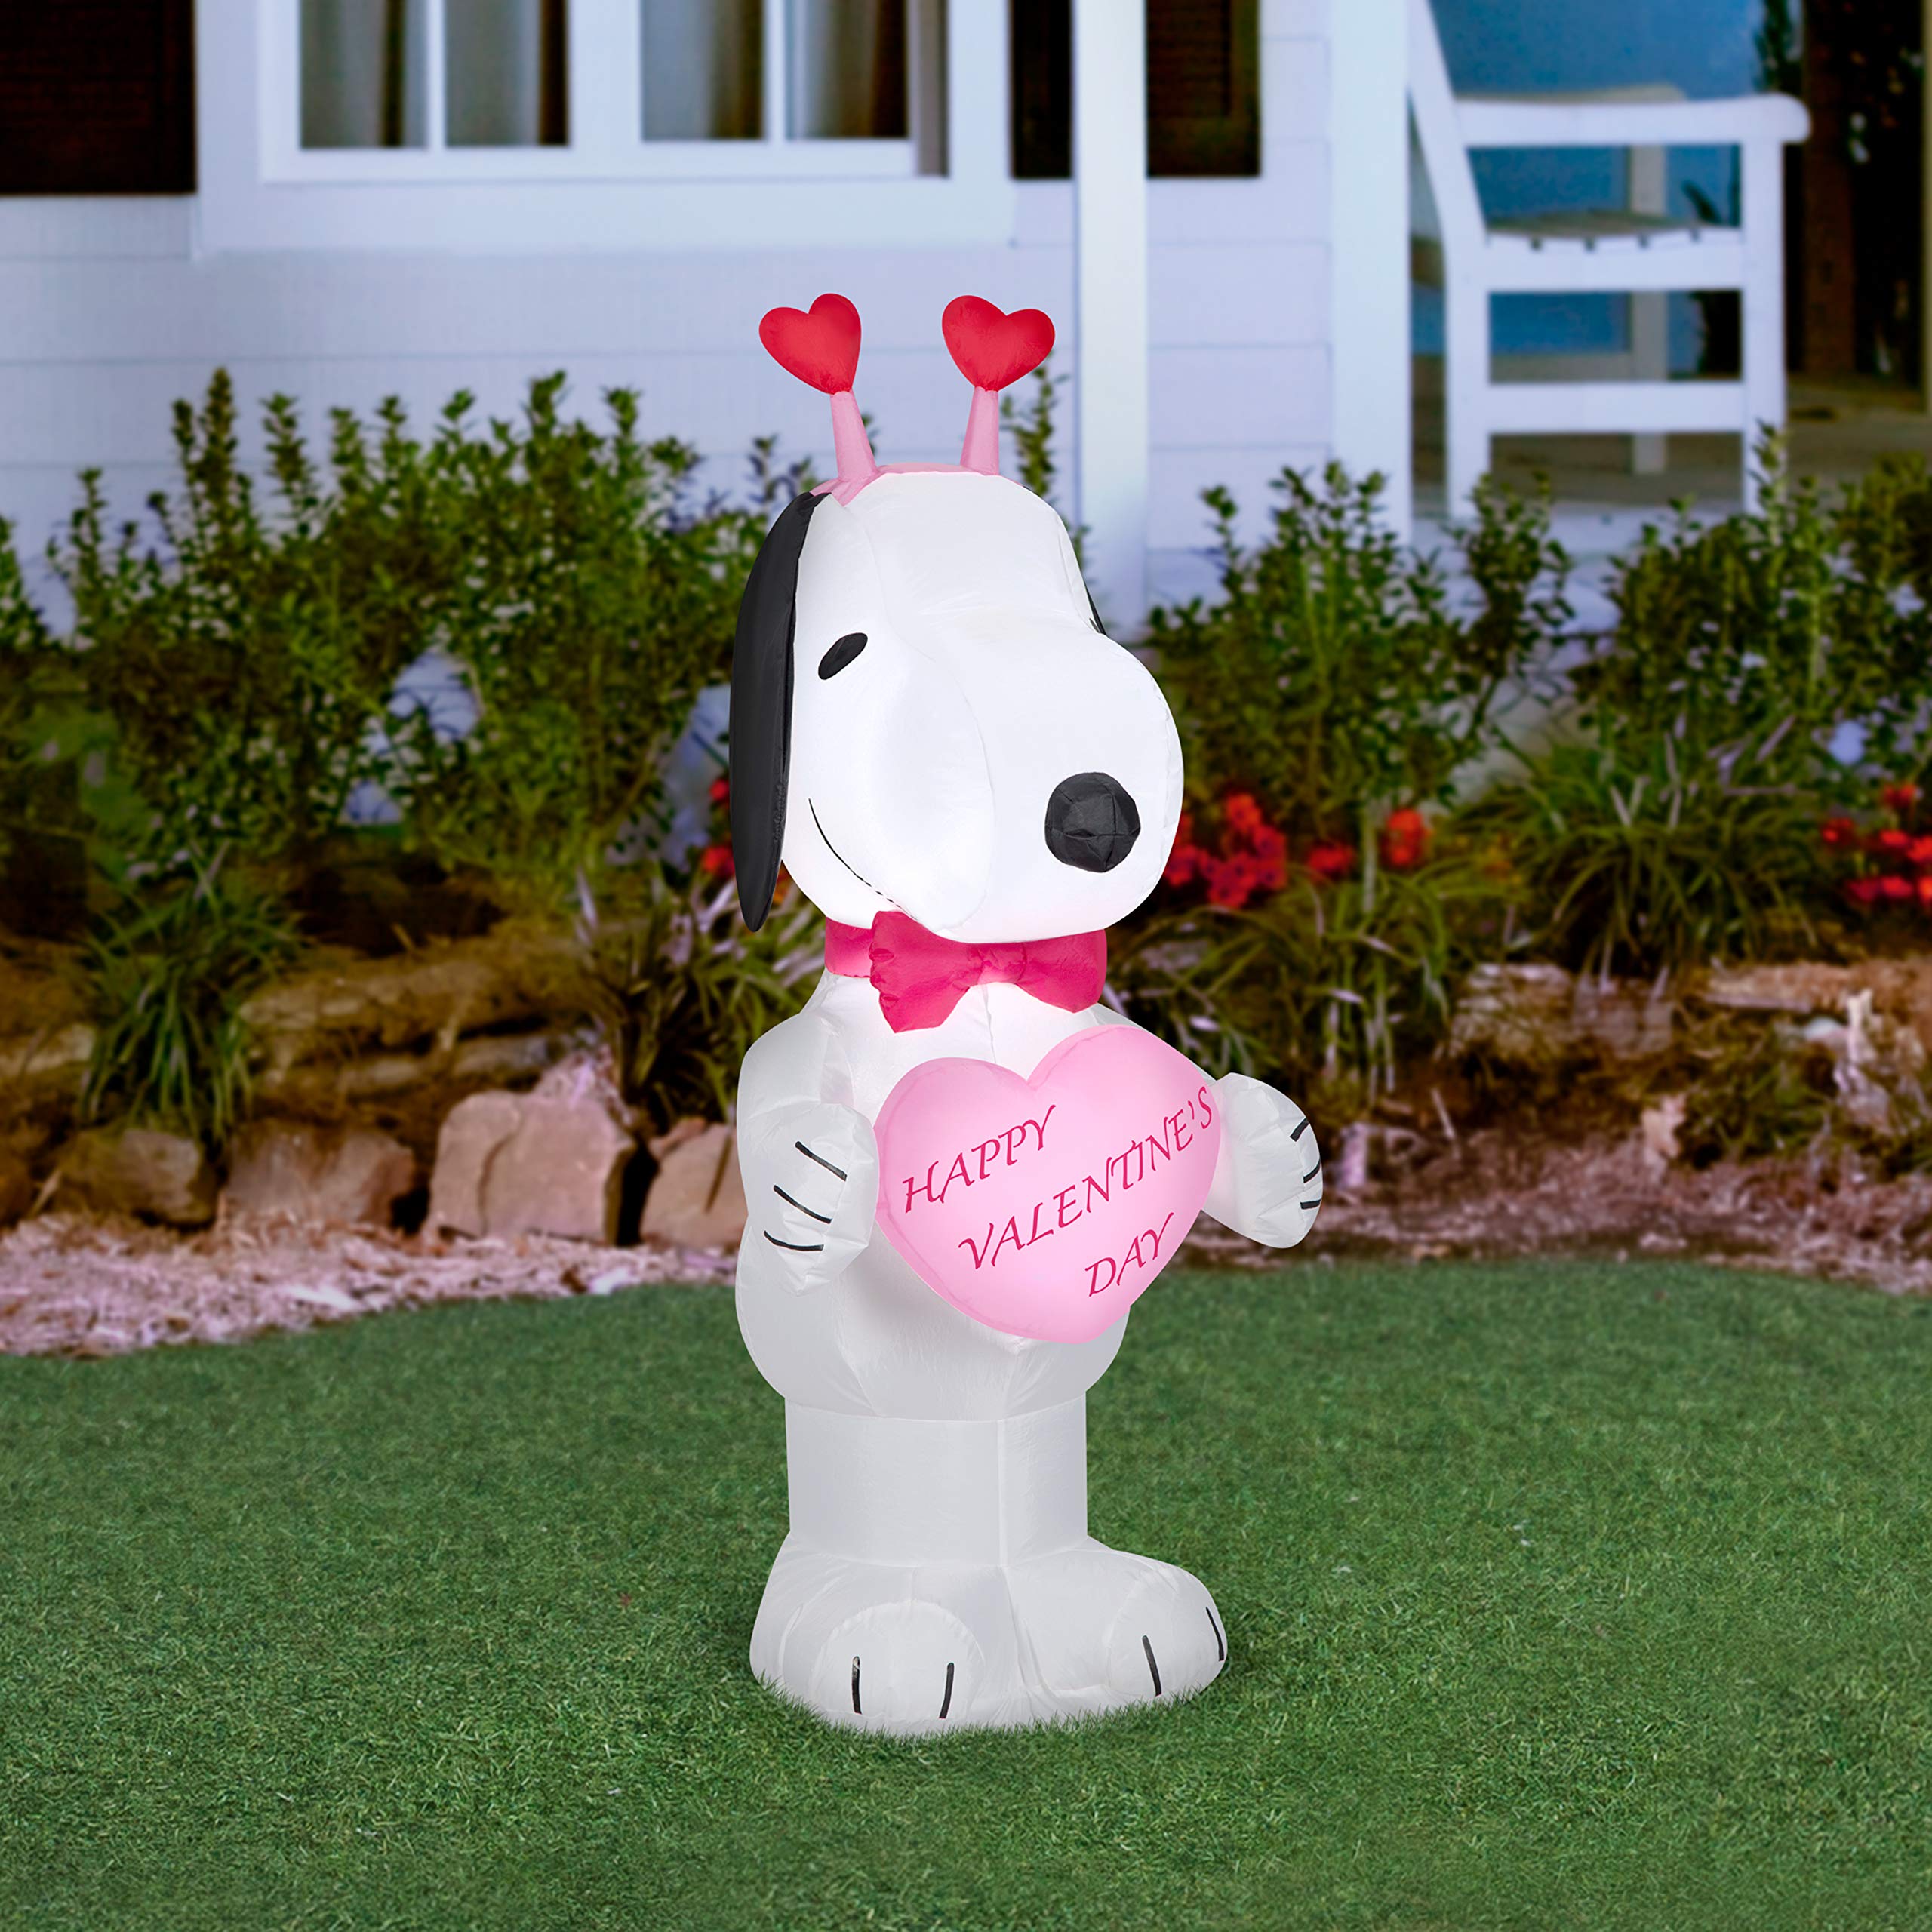 Gemmy Airblown Inflatable Valentine Snoopy, 3.5 ft Tall, Pink